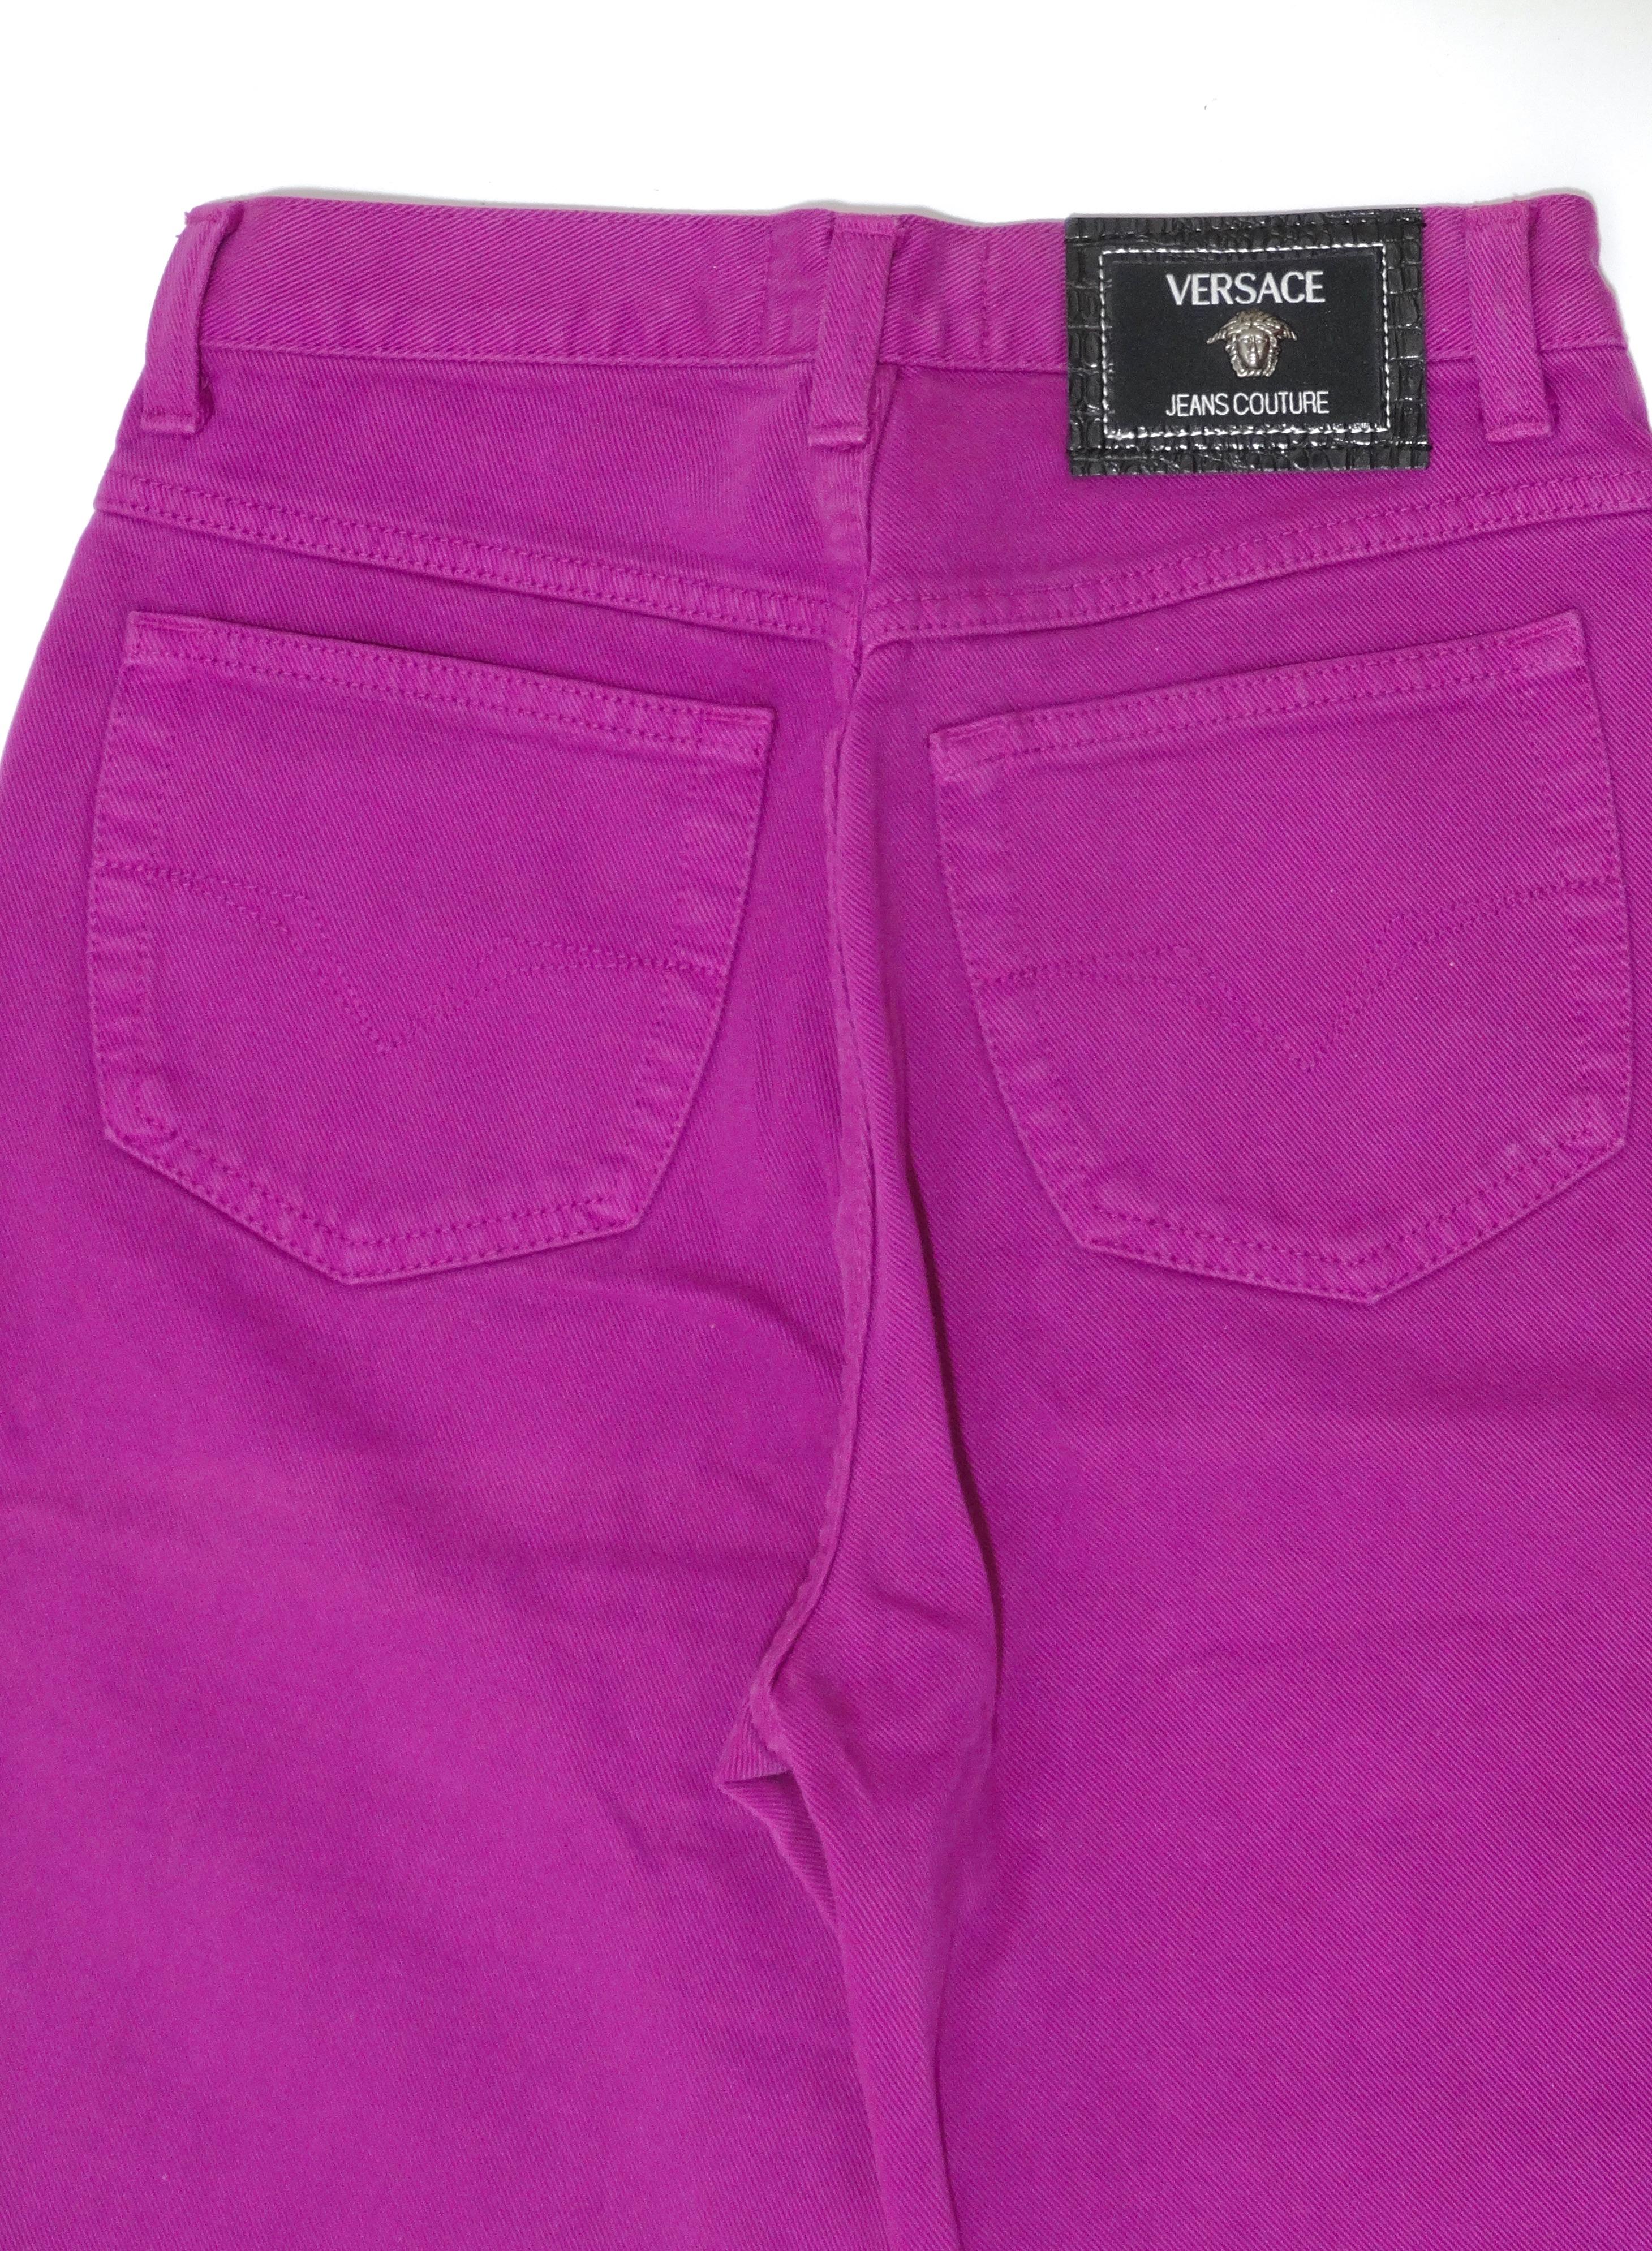 Versace Jeans Couture 1990er Jahre lila Jeans  im Angebot 3